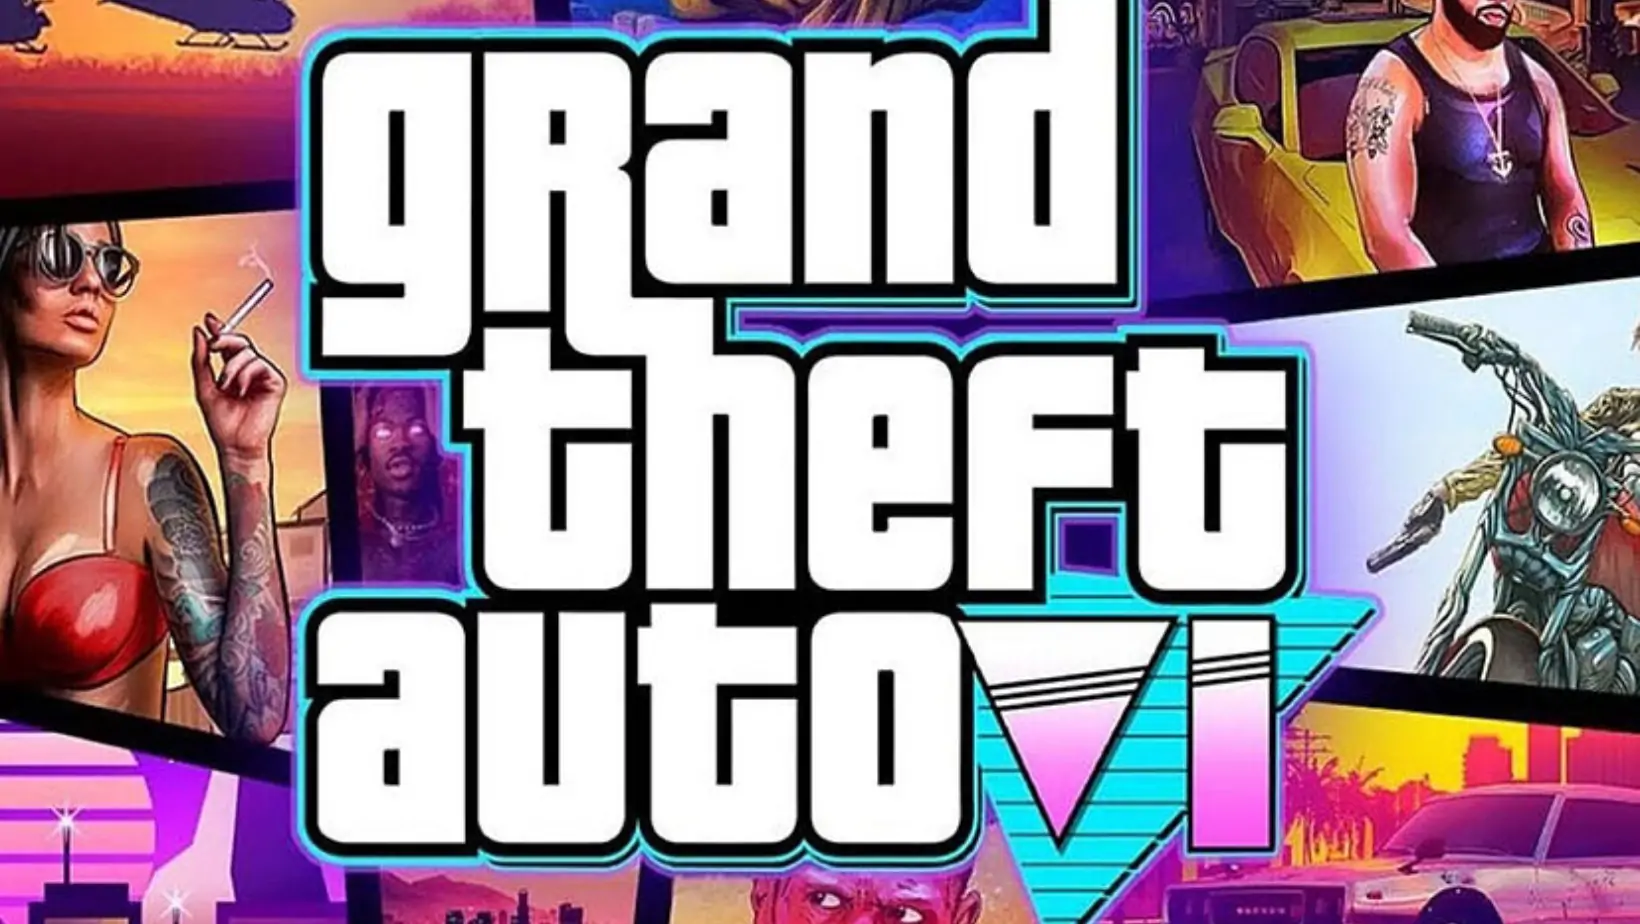 GTA 6 trailer destroys records, is the most watched trailer in 24 hours 